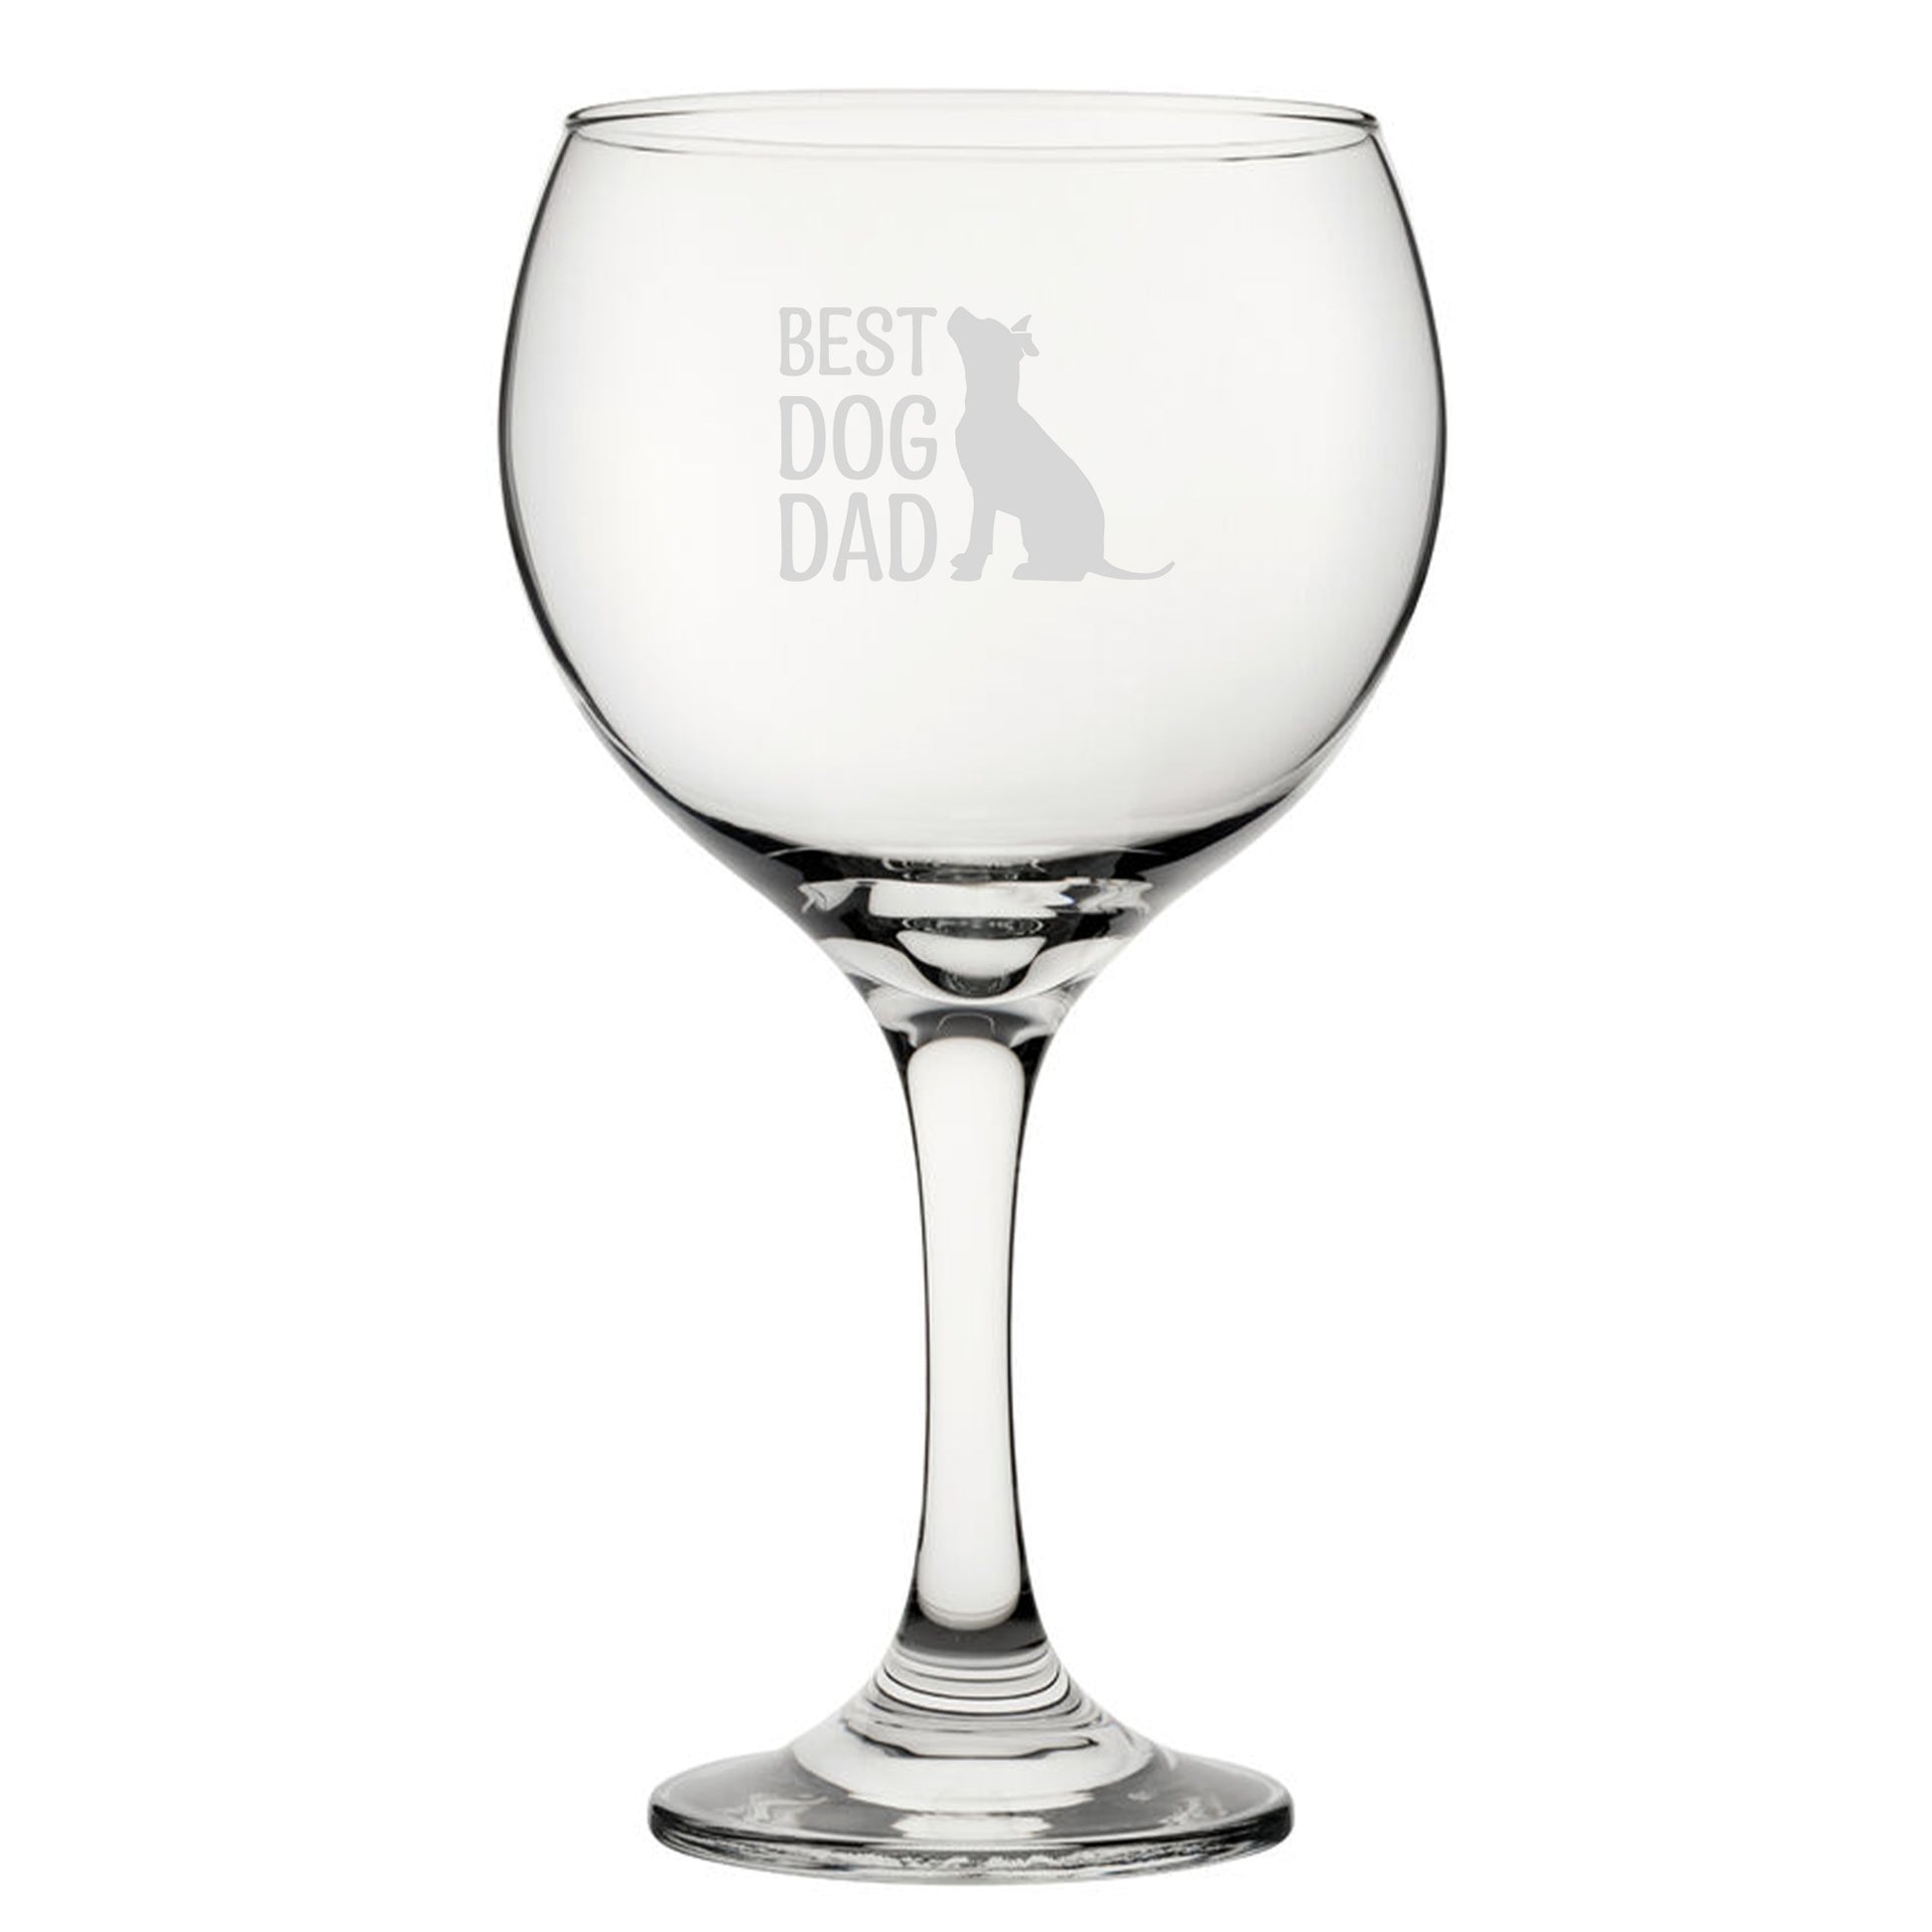 Best Dog Dad - Engraved Novelty Gin Balloon Cocktail Glass Image 2